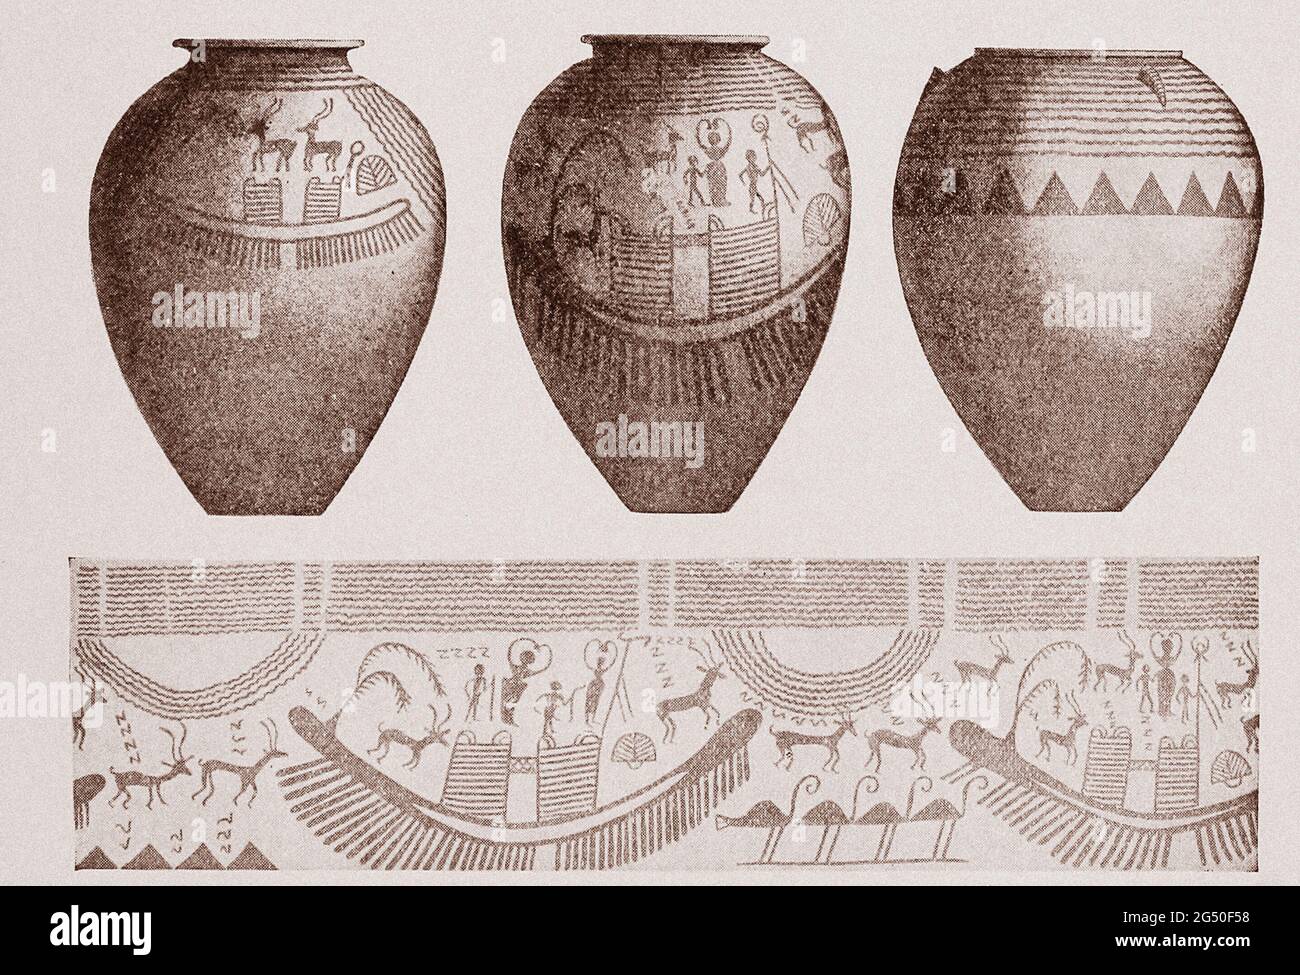 Ancient Egypt. Predynastic pottery with painted designs of boats, animals, men and women. 1912 book illustration Stock Photo